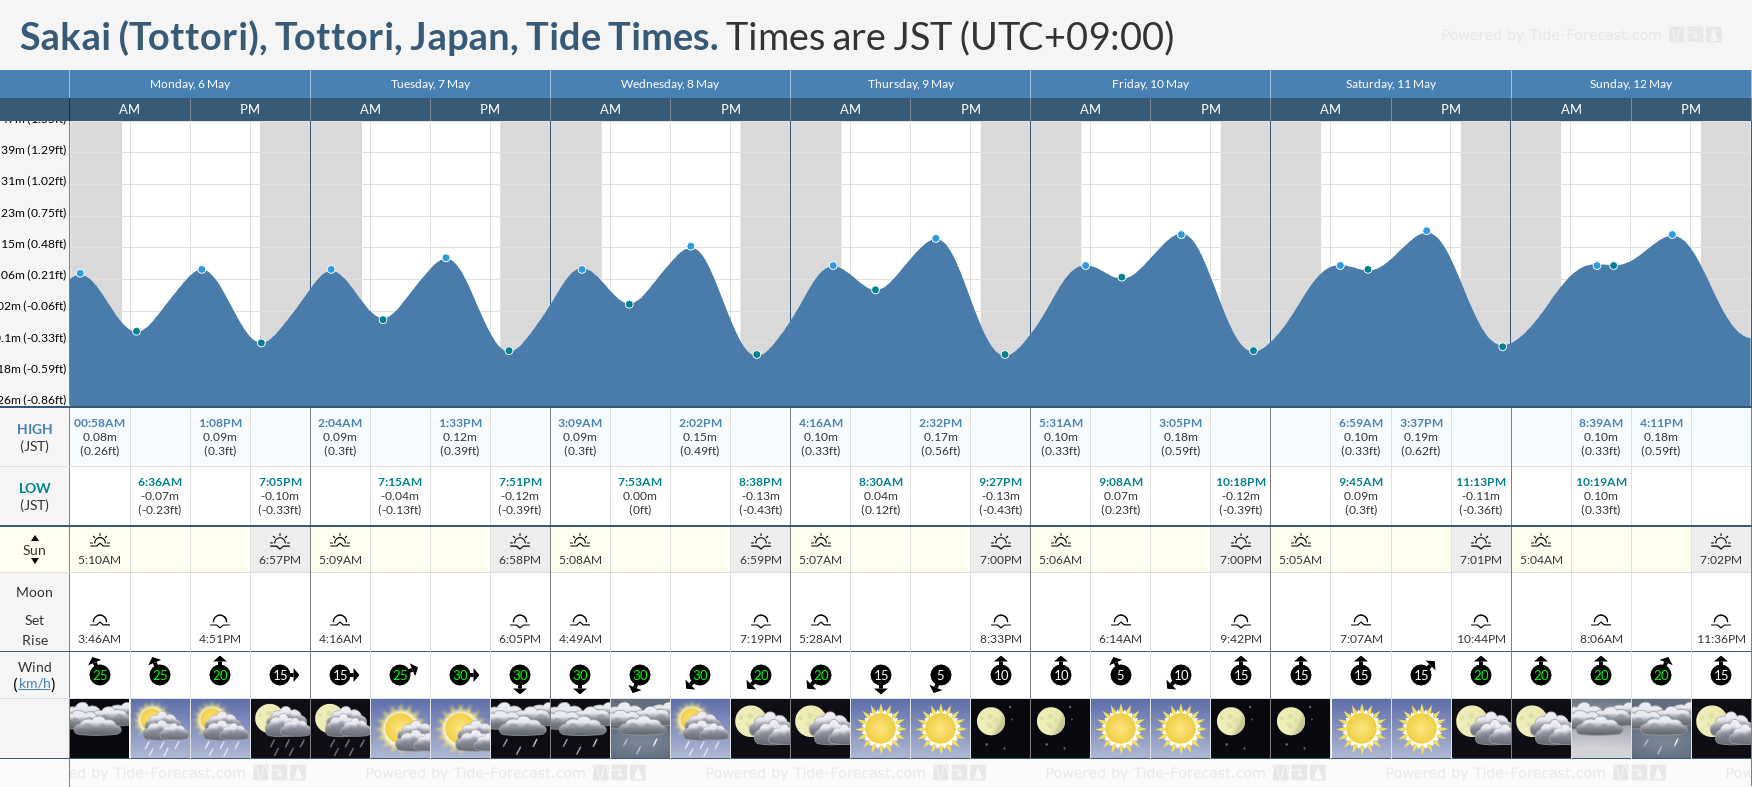 Sakai (Tottori), Tottori, Japan Tide Chart including high and low tide tide times for the next 7 days